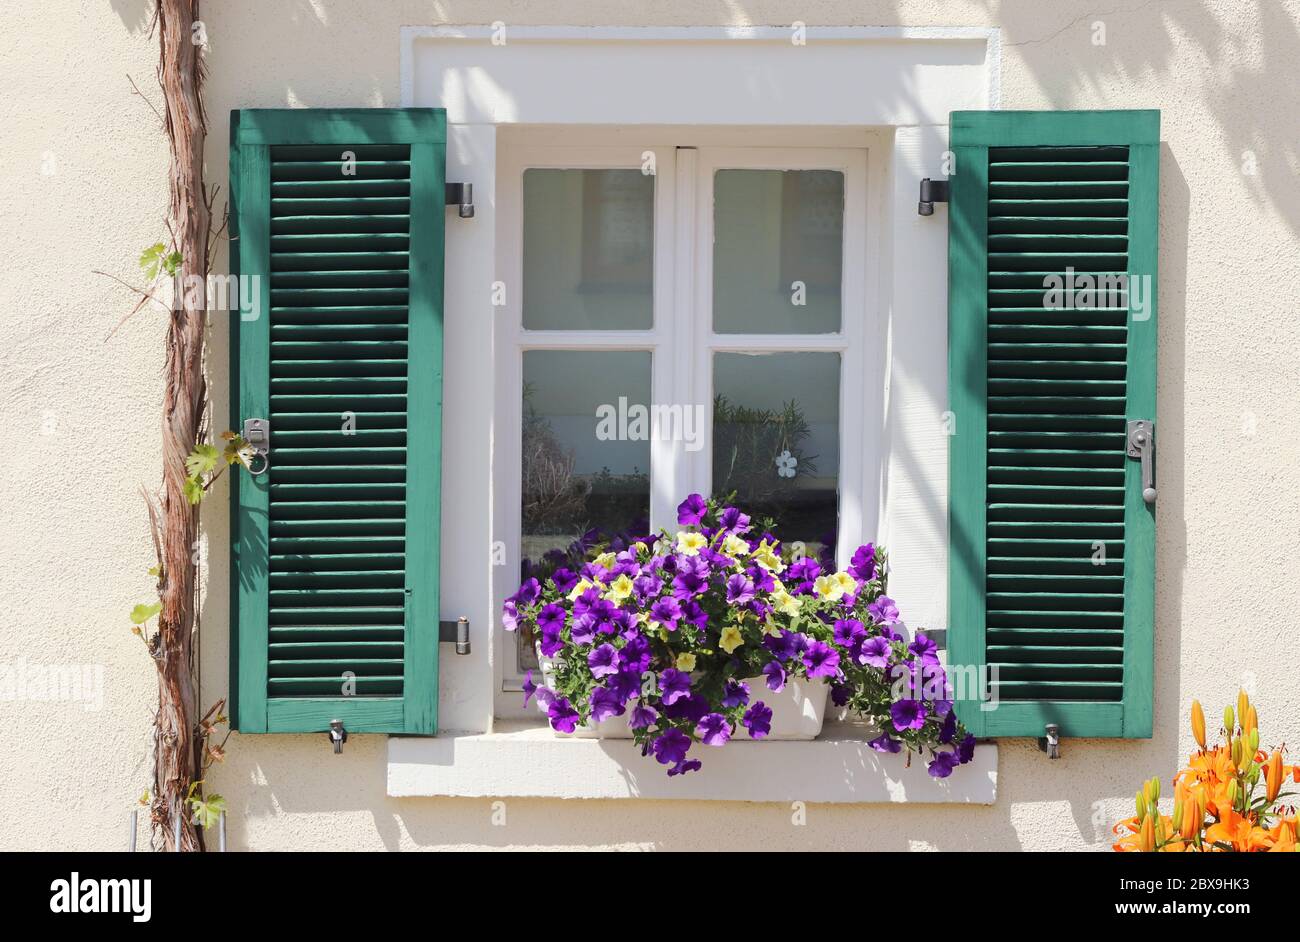 beautiful old window with green shutters and purple flowers on the window sill and a vine growing up on the facade Stock Photo